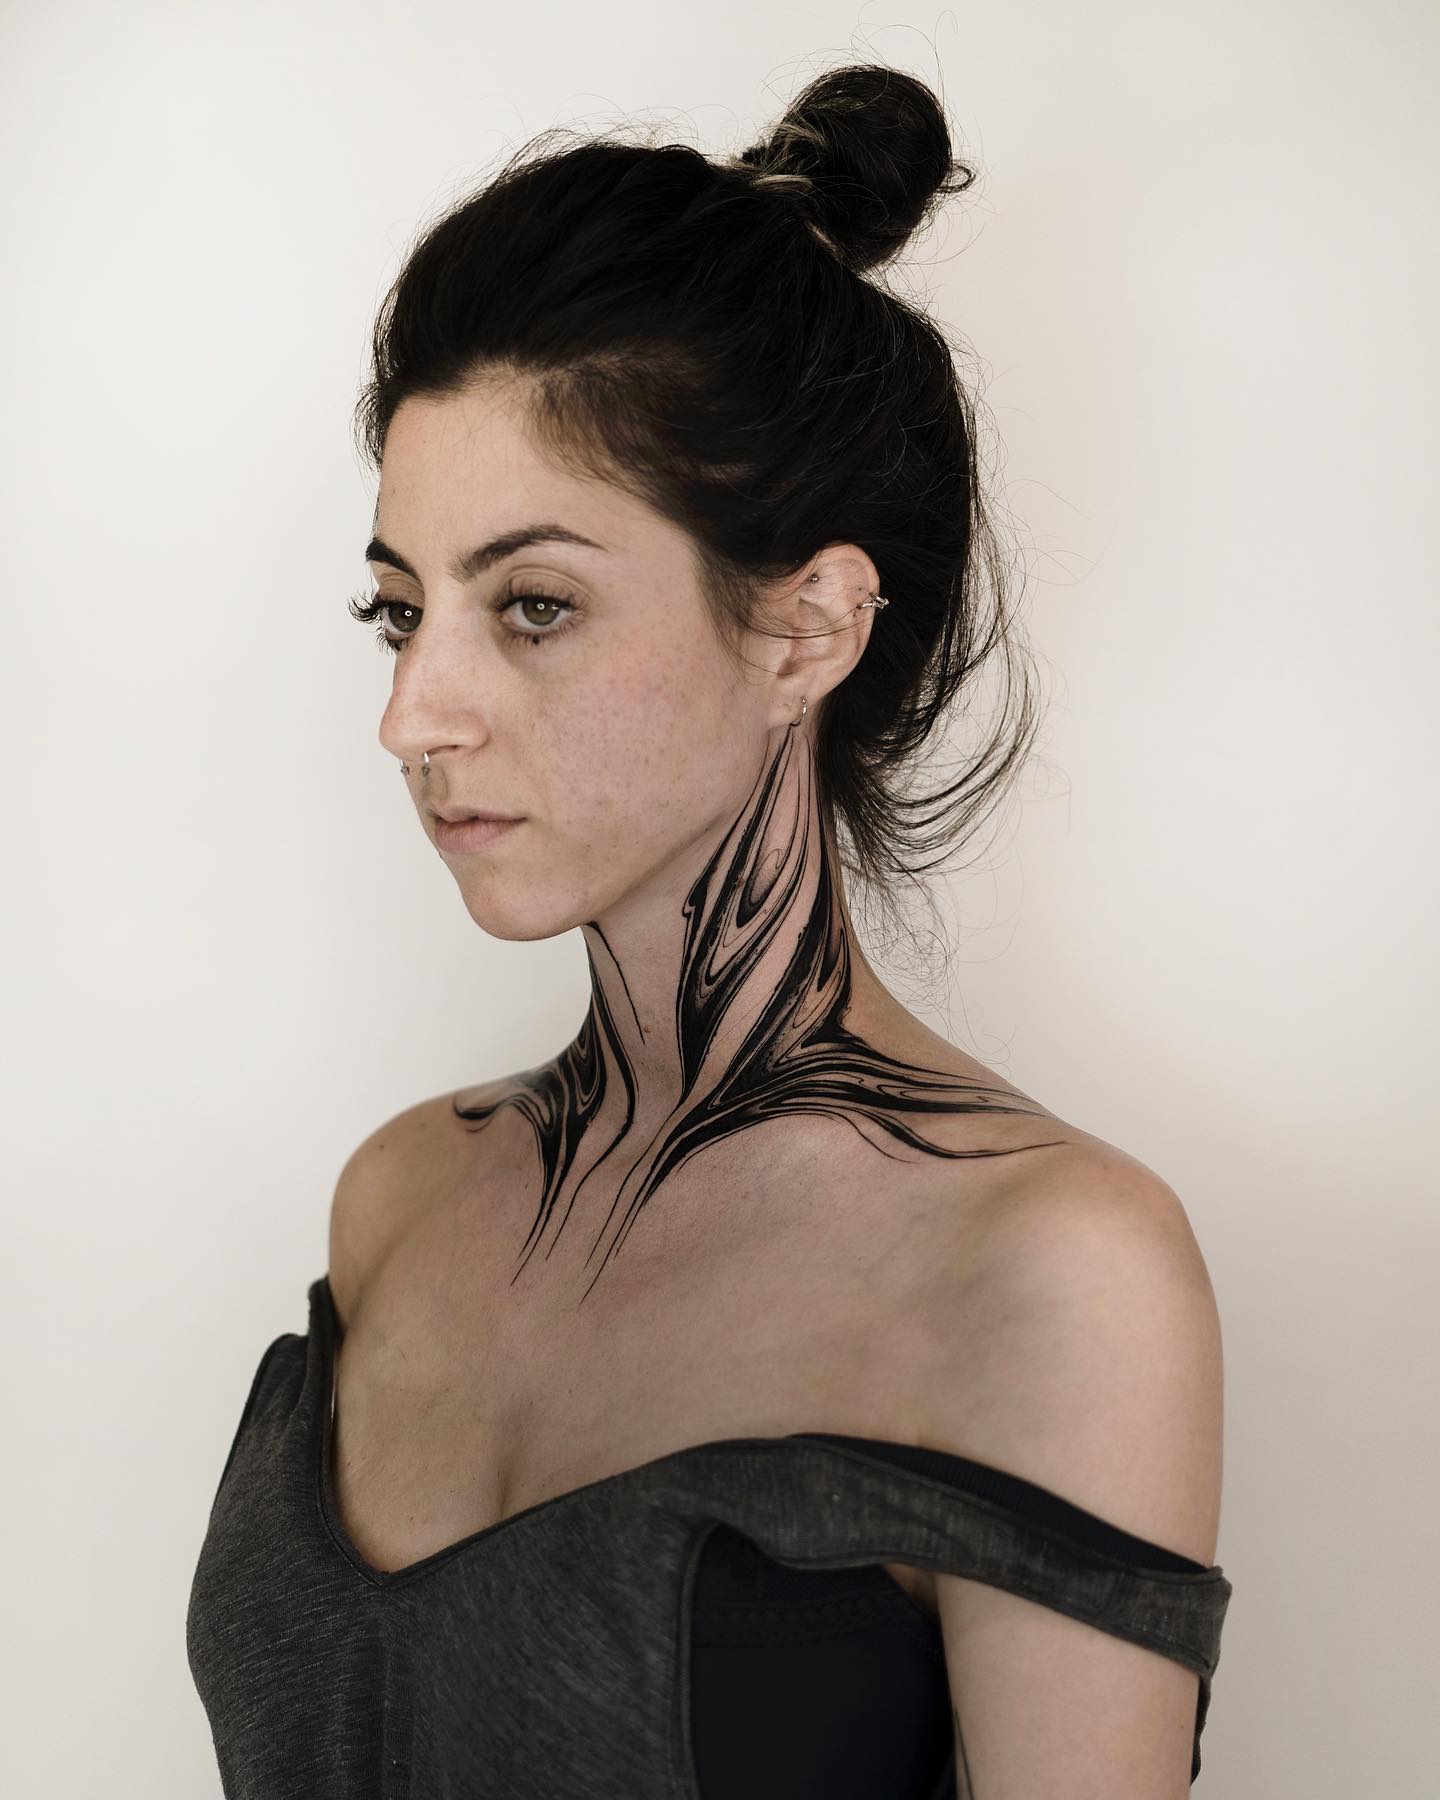 27 Cool Throat Tattoo Ideas to Show Your True Personality